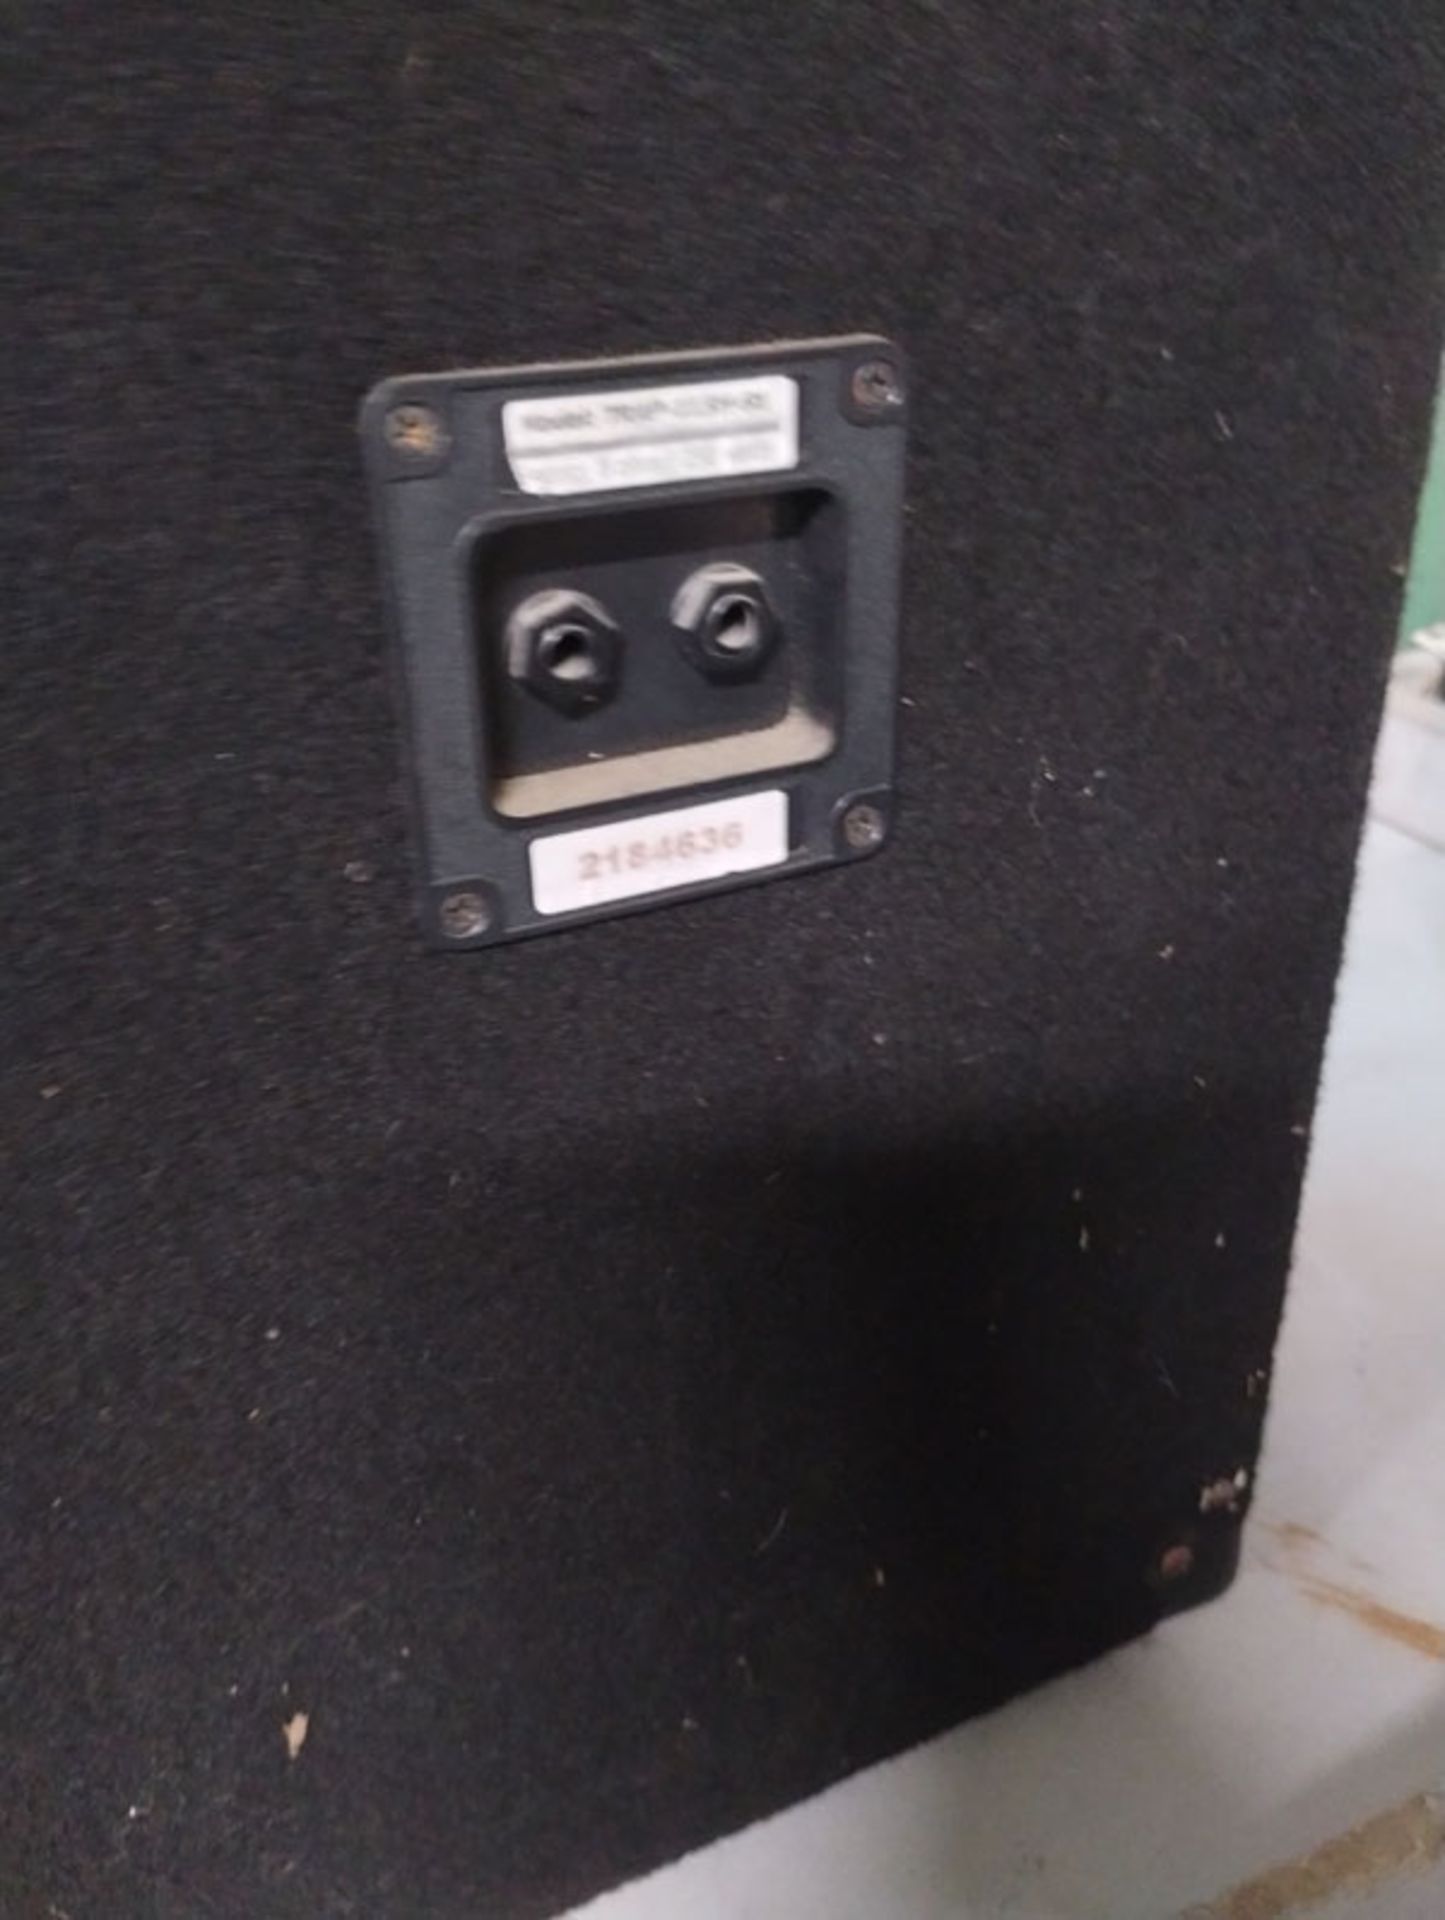 SET OF (2) 15" SPEAKERS - MODEL TRAP-115H-S1 , 250W (This lot of located at the Grossman warehouse - Image 8 of 8